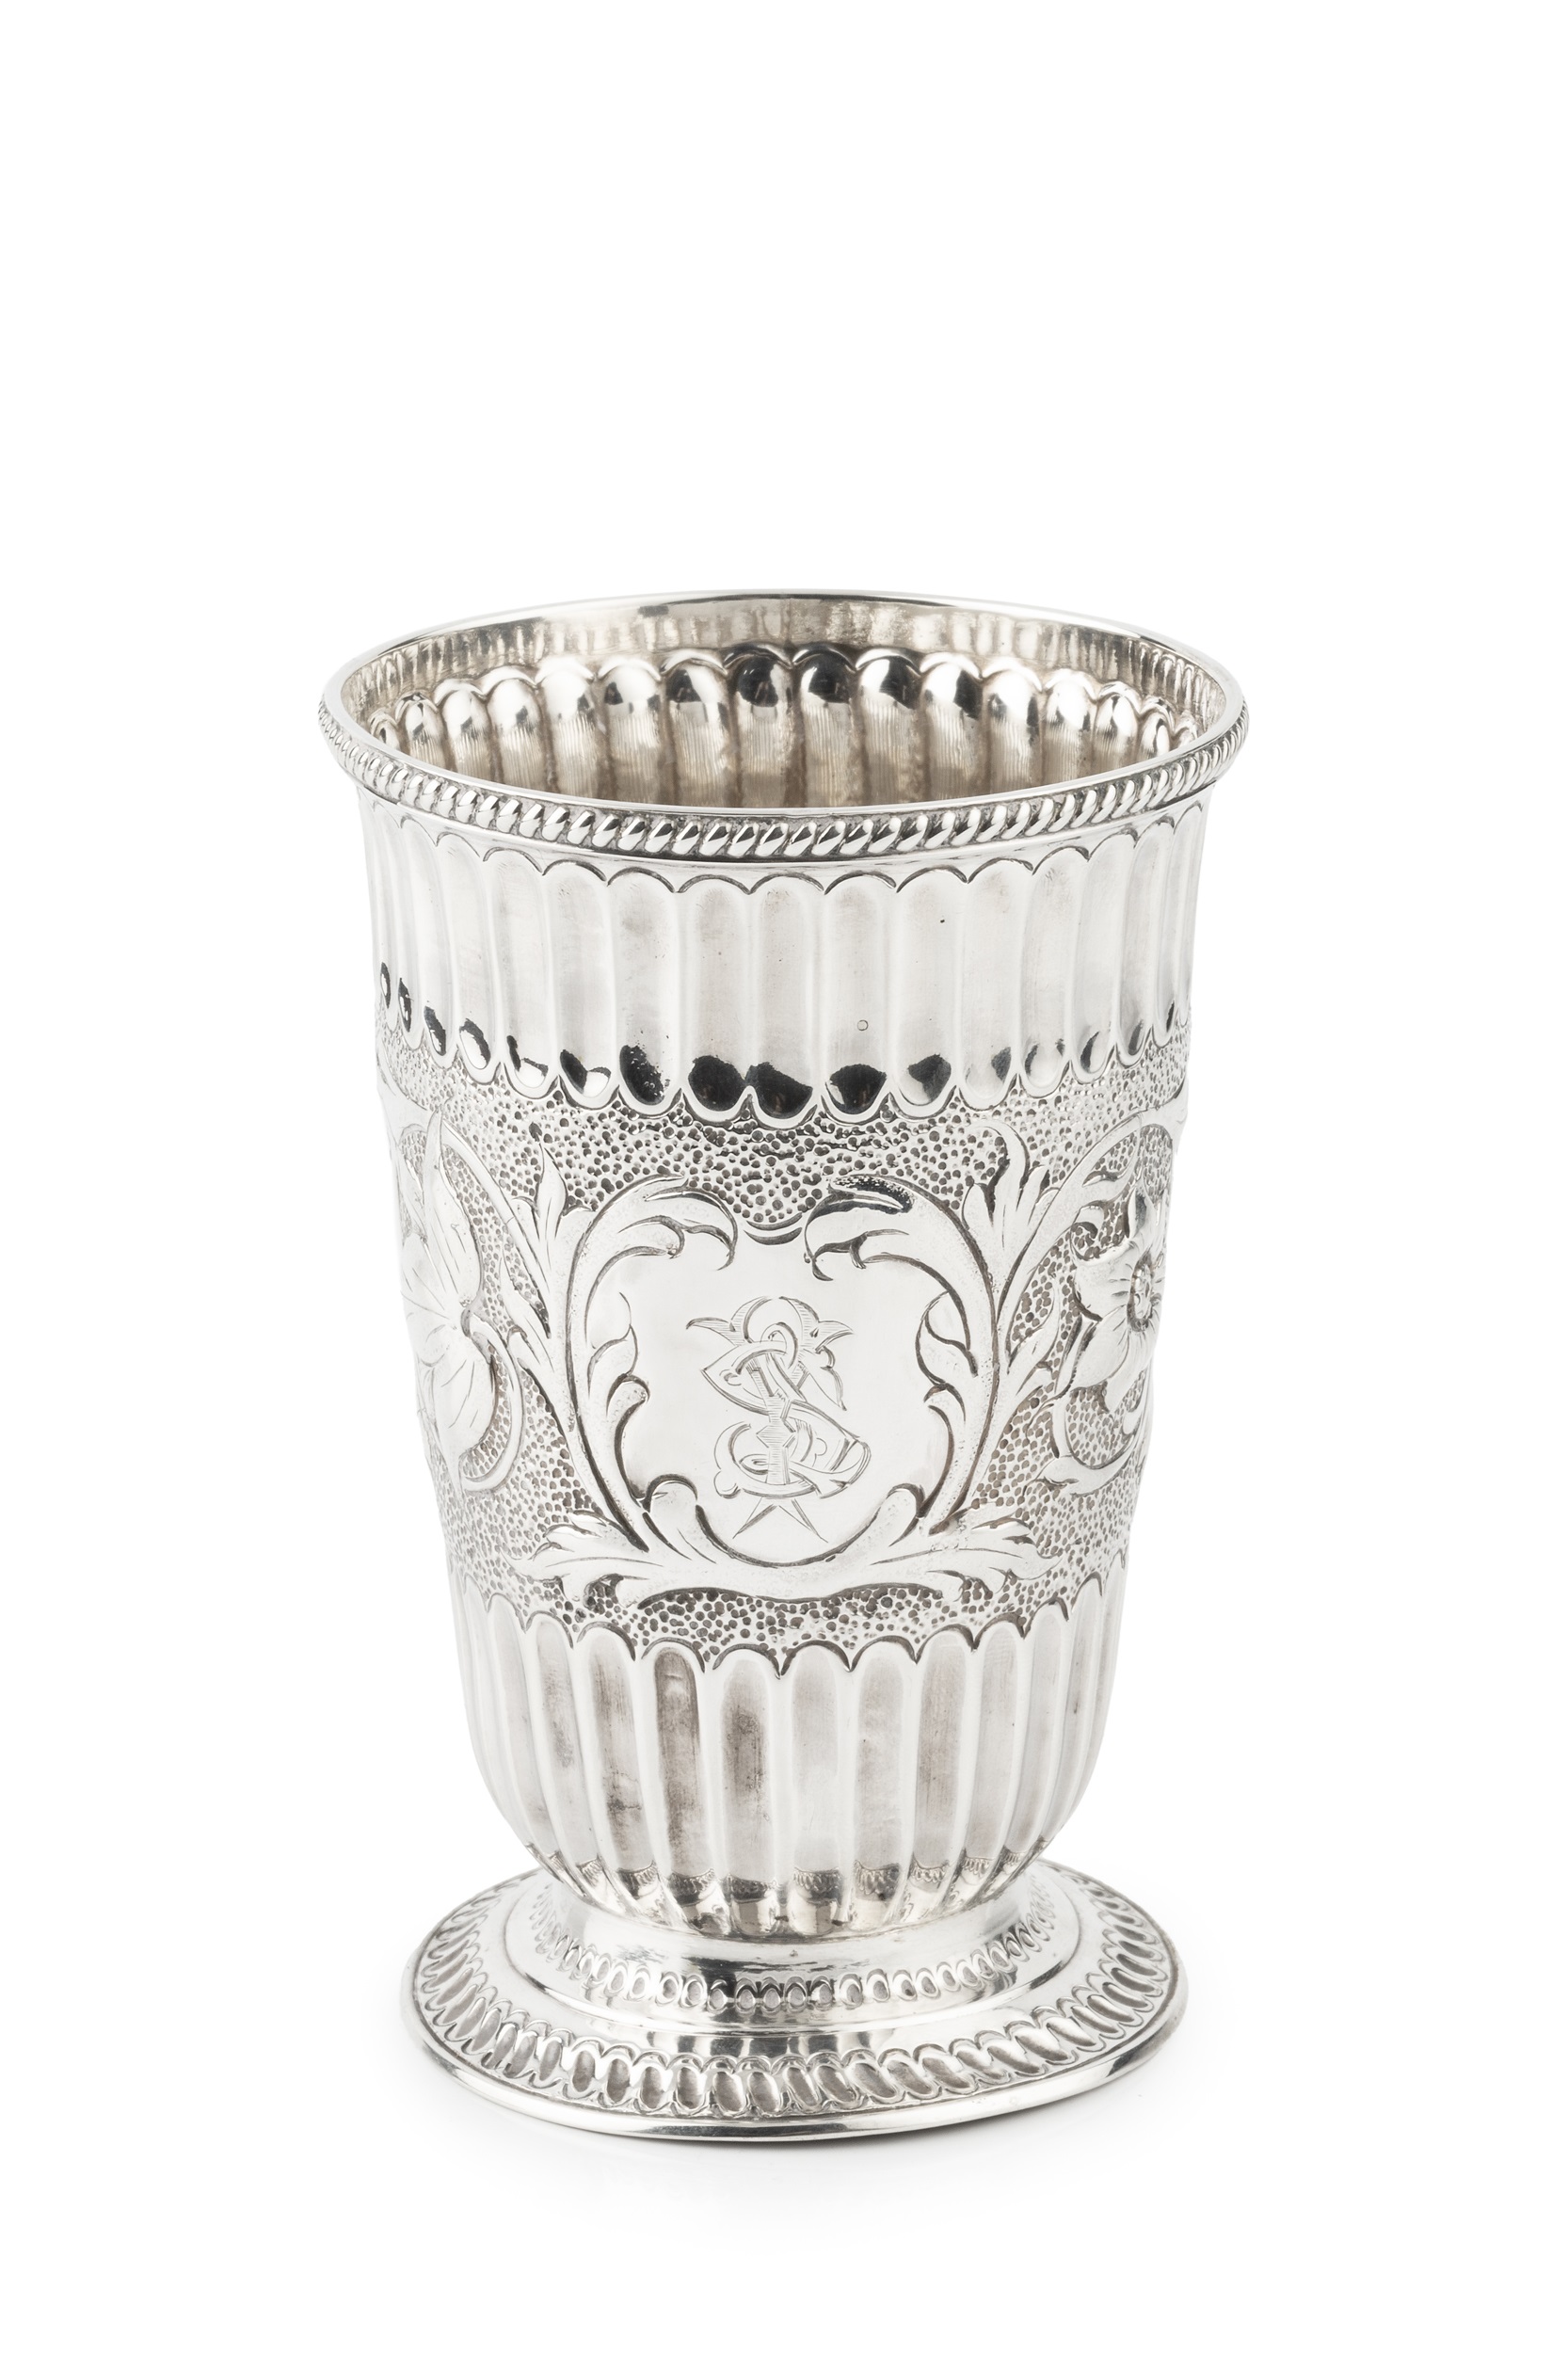 A mid Victorian silver beaker, the slightly tapered and flared body chased and engraved with a